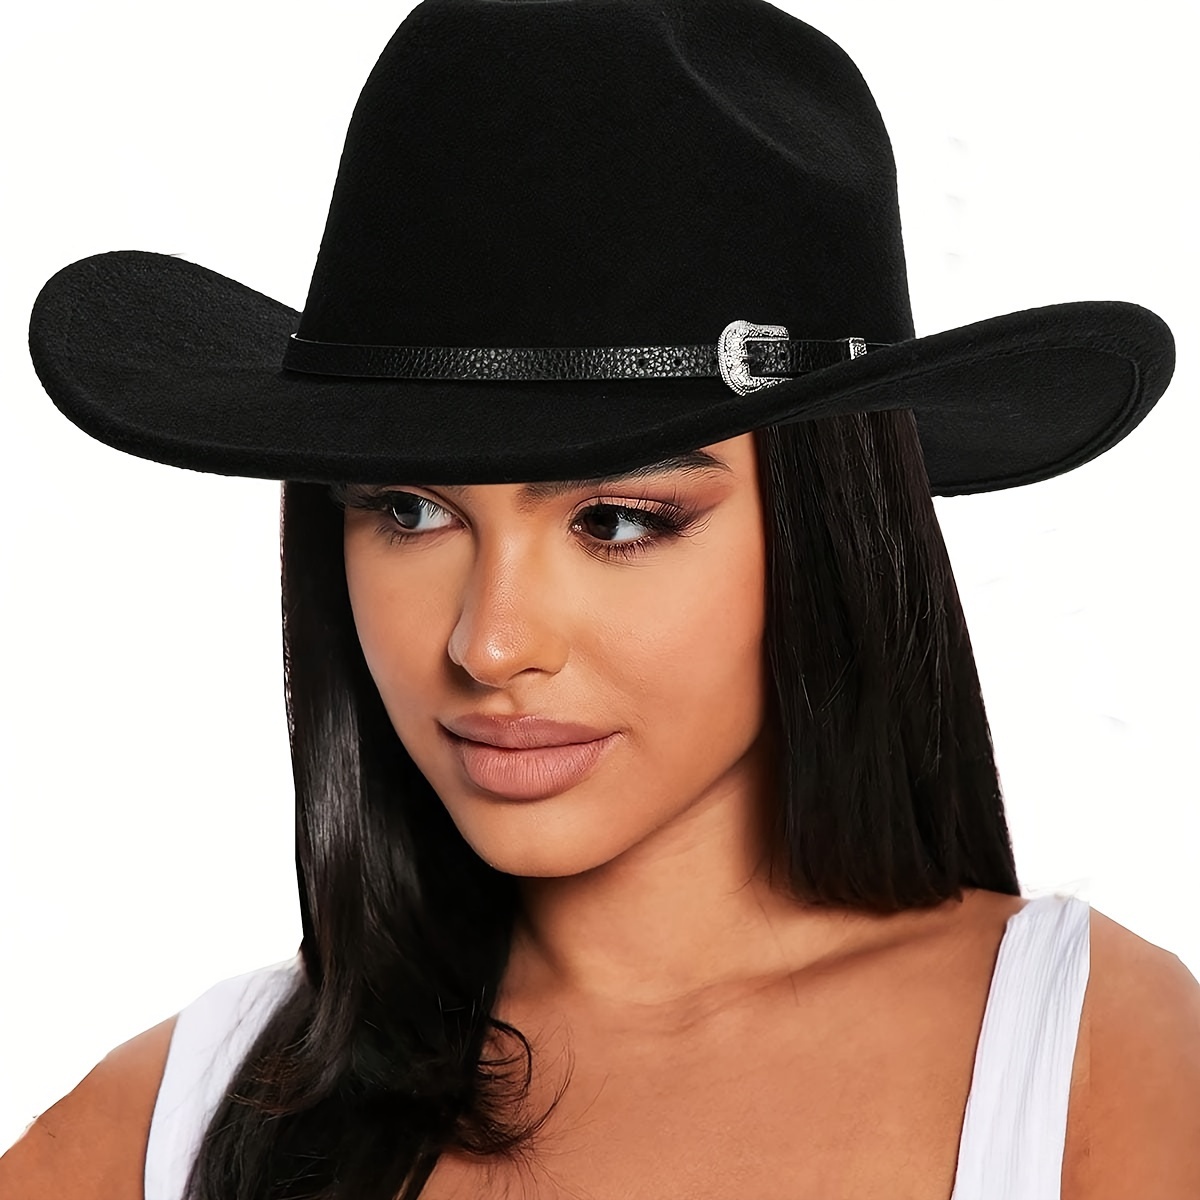 

1pc Classic Fashionable Cowboy Hat Vintage Classic Belt Decor Panama Cowgirl Hat Western Sunshade Hats For Women